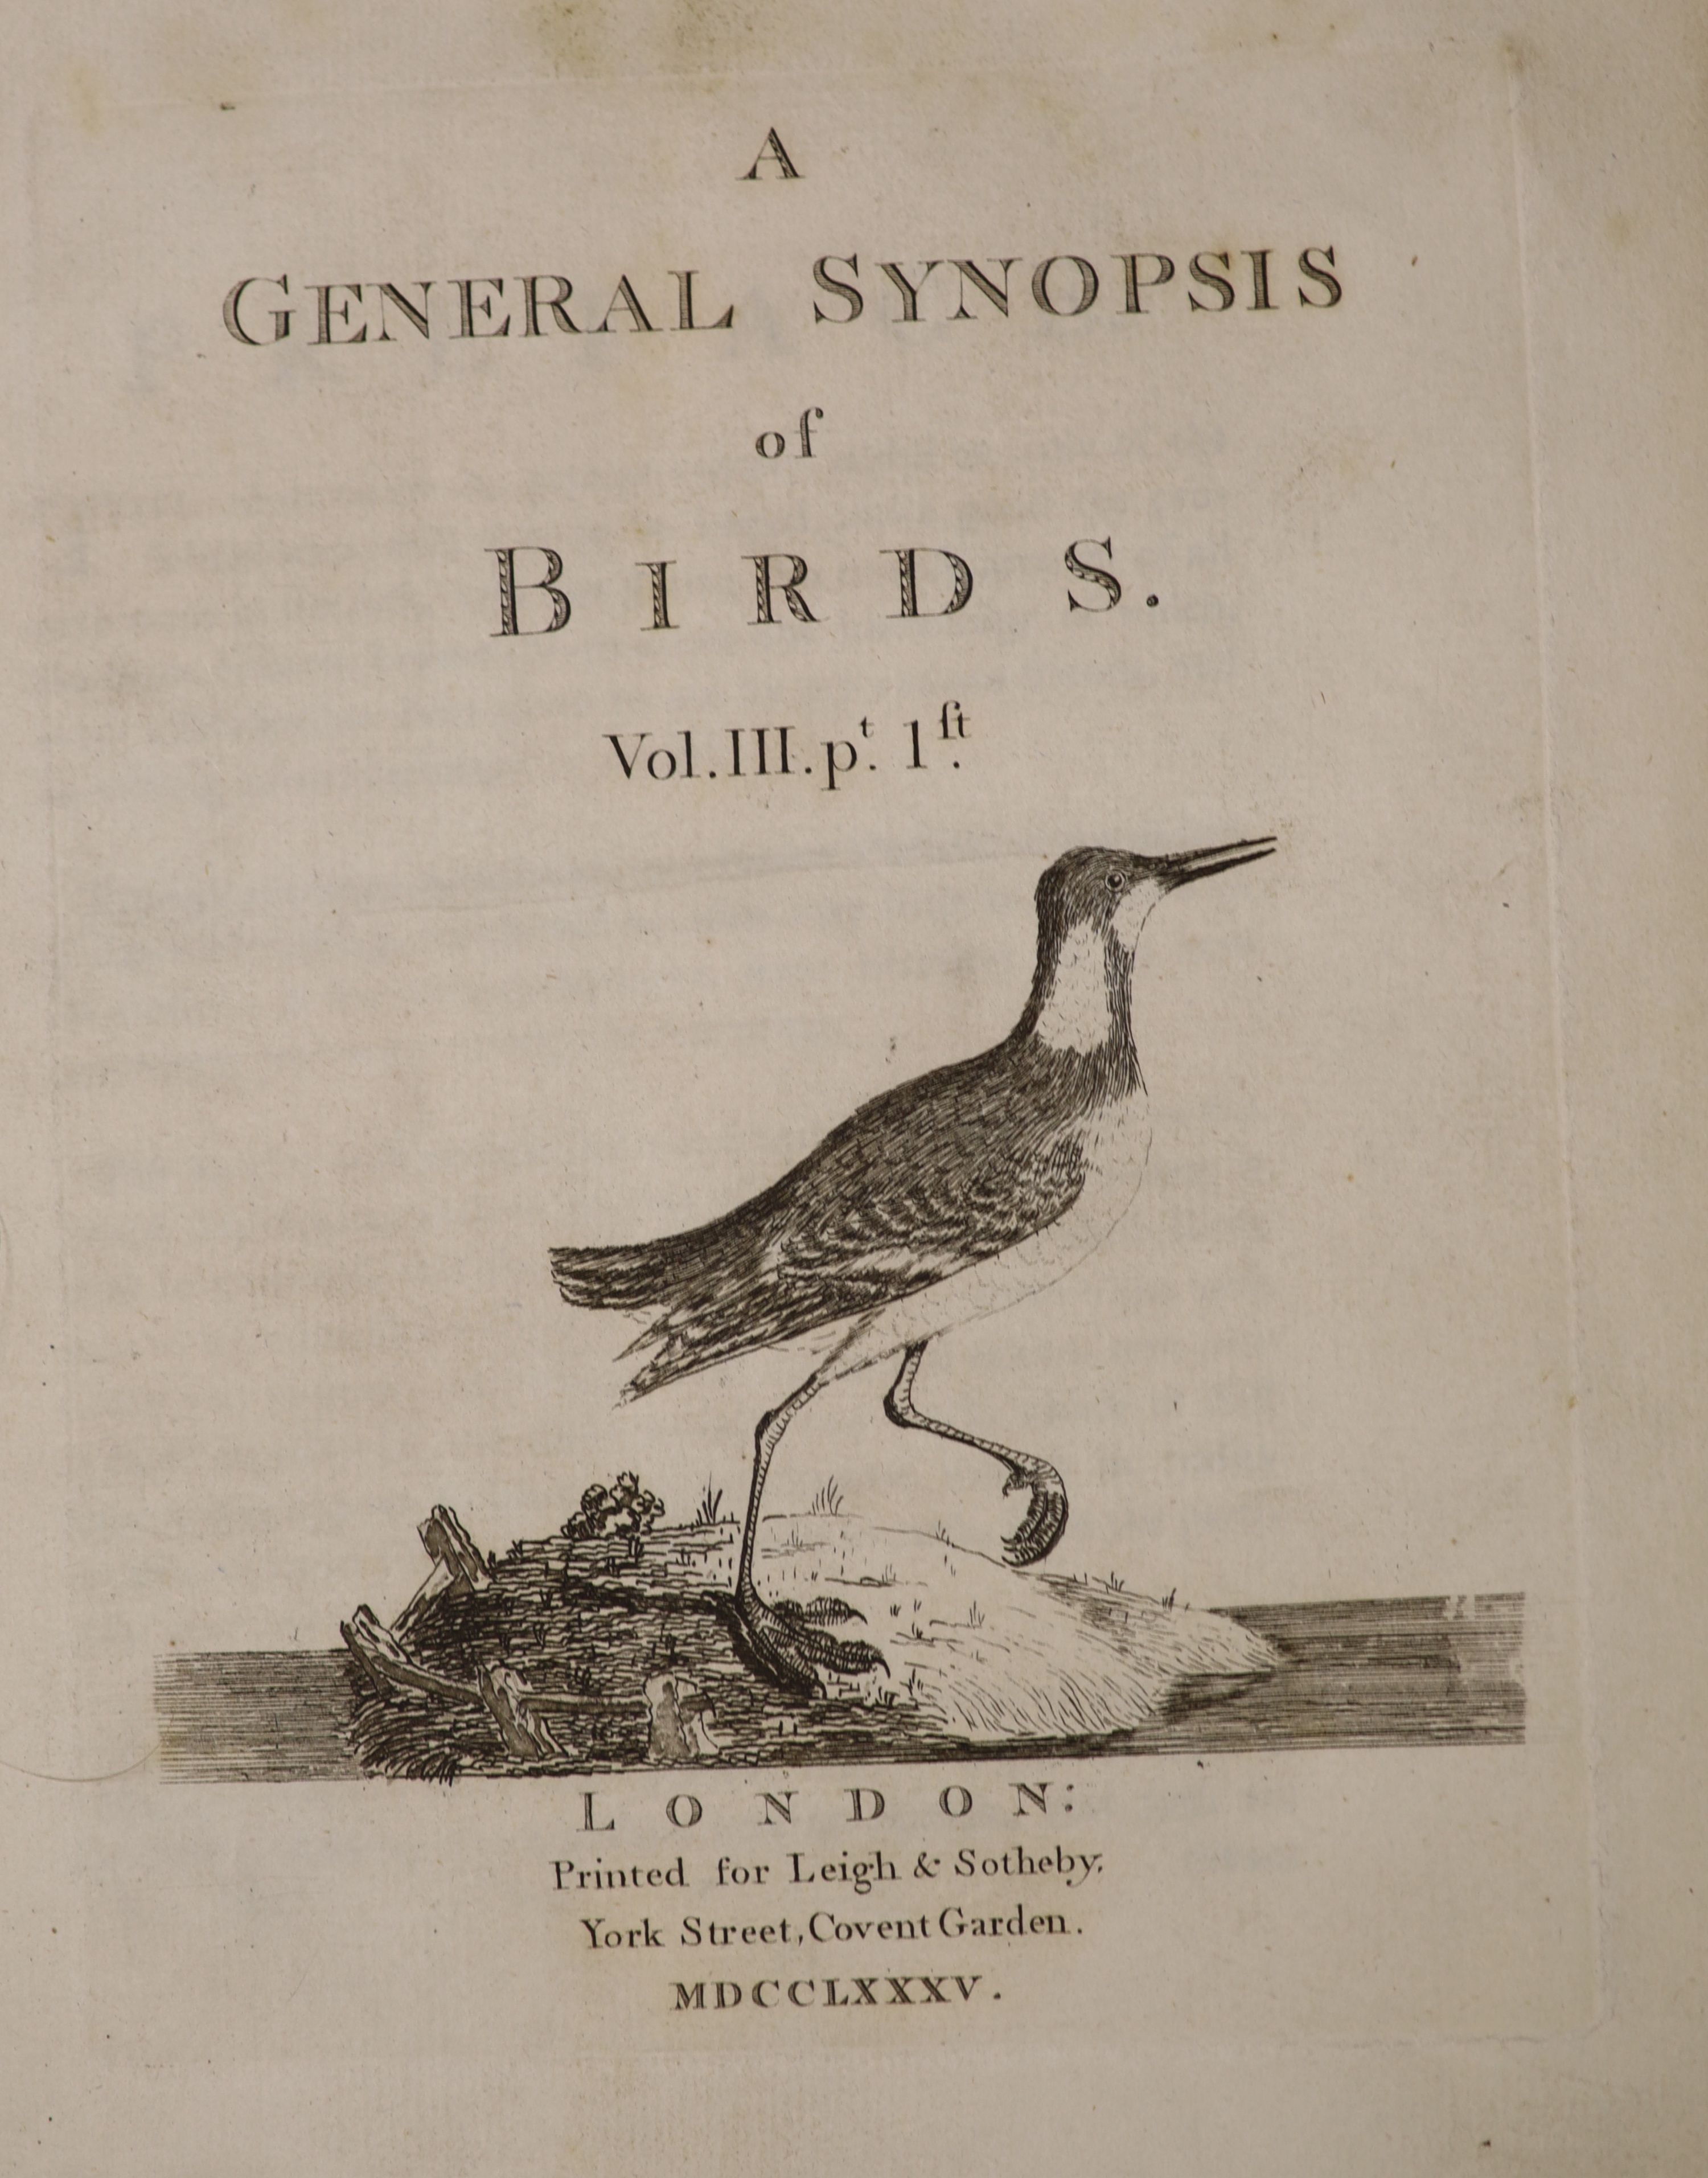 Latham, John - A General Synopsis of Birds, qto, calf, Vol. 3, pt. 1, 1785, and - Supplement to the General Synopsis of Birds, each with uncoloured engraved plates, titling and vol number labels lacking or loose, Leigh a